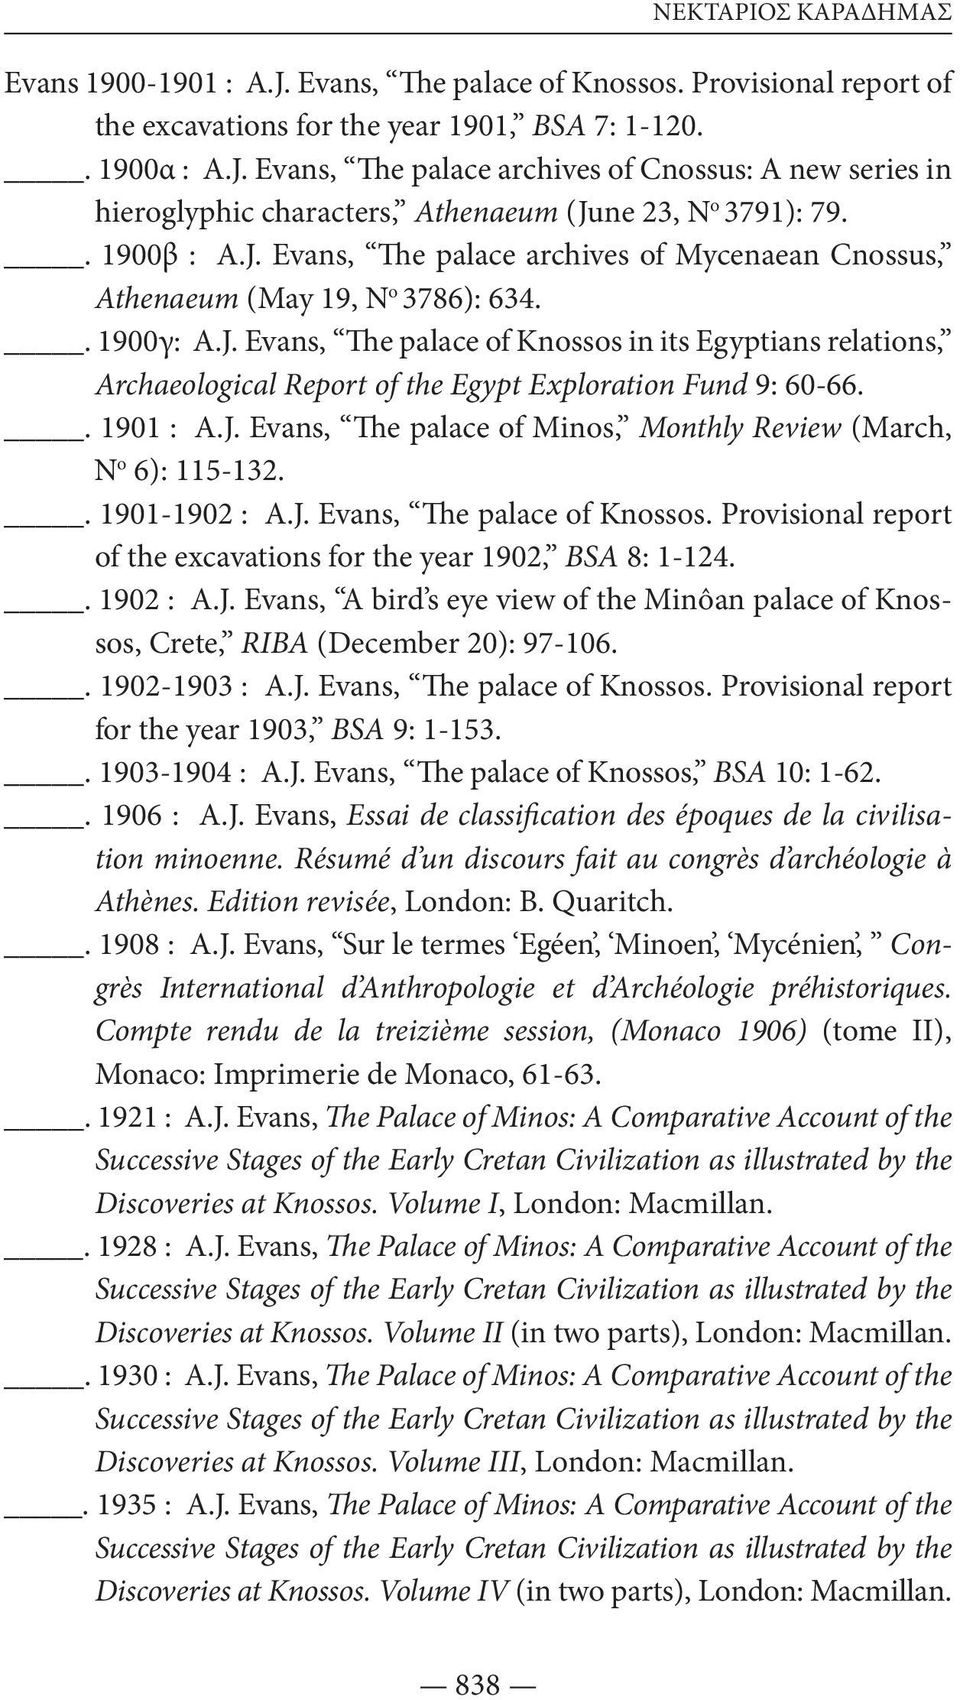 . 1901 : A.J. Evans, The palace of Minos, Monthly Review (March, N o 6): 115-132.. 1901-1902 : A.J. Evans, The palace of Knossos. Provisional report of the excavations for the year 1902, BSA 8: 1-124.